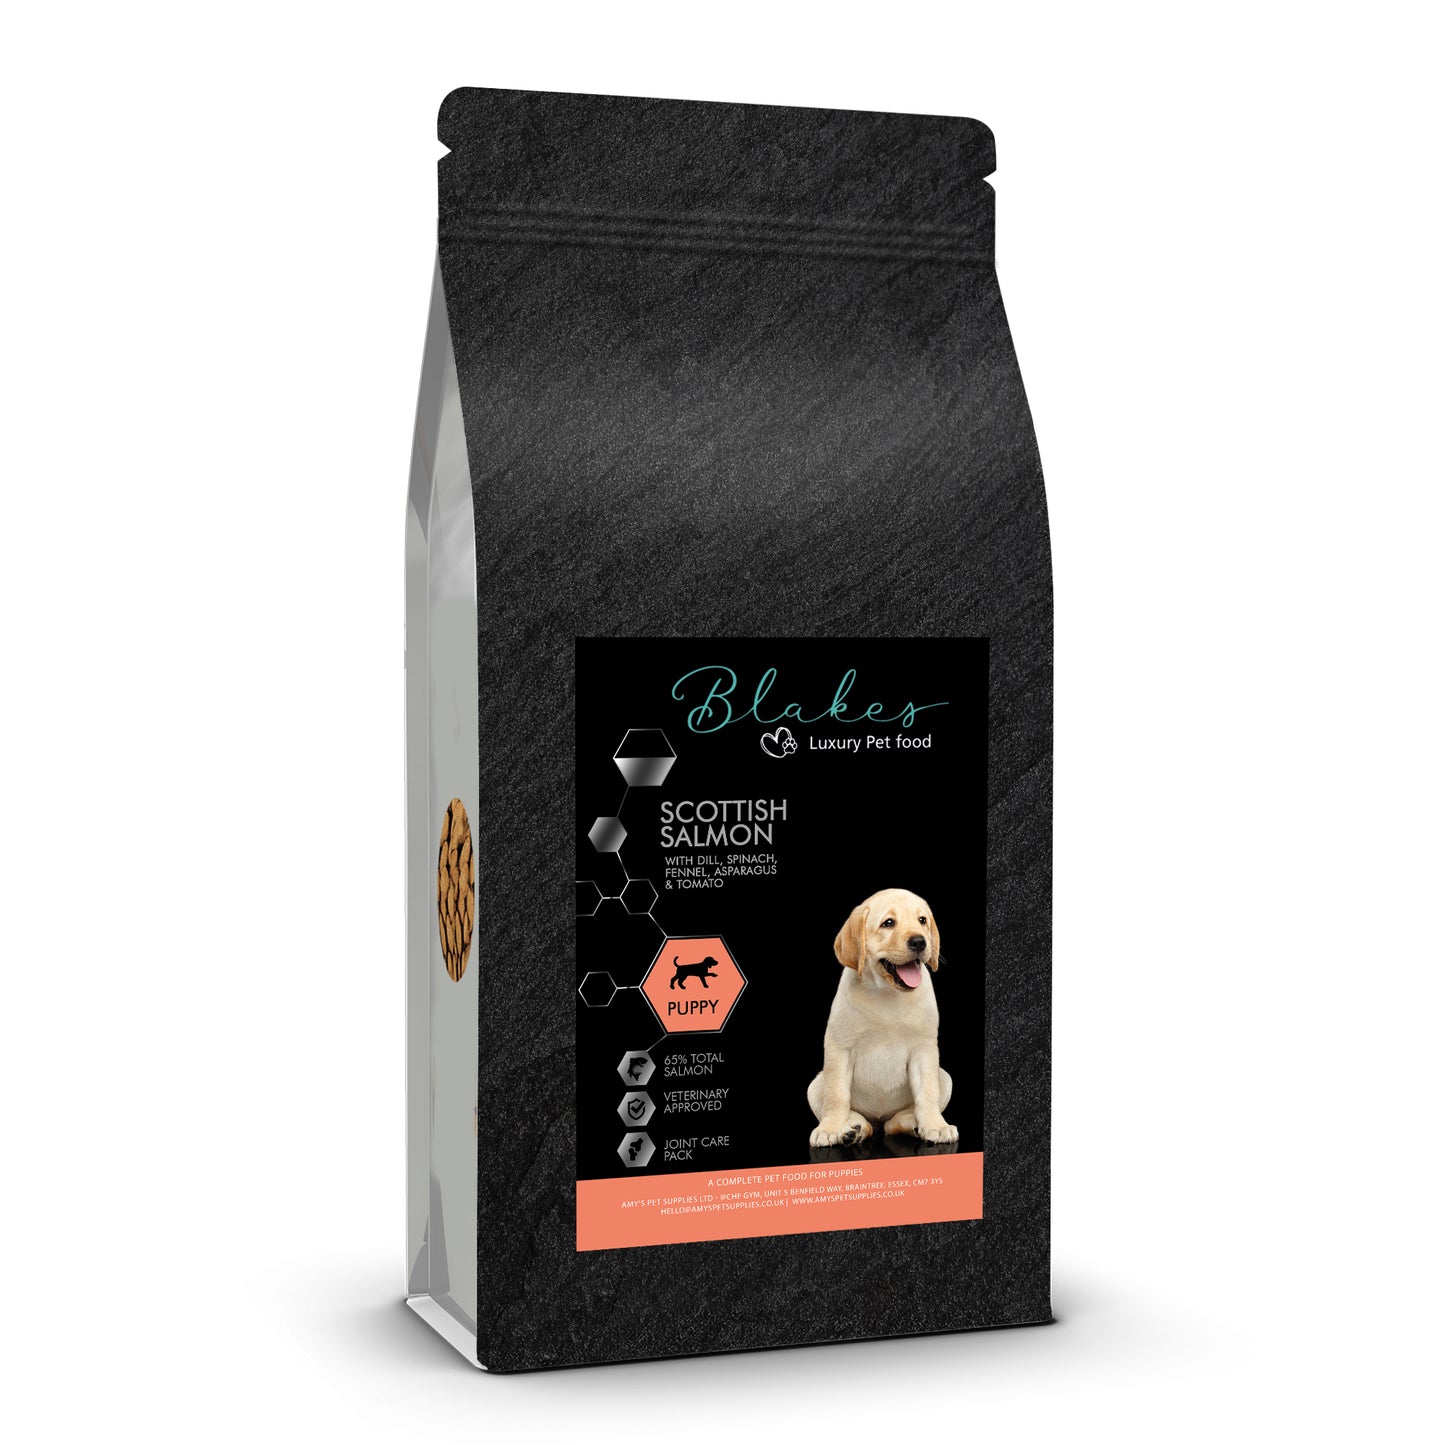 Blakes - Puppy - Superfood Complete Dog Food